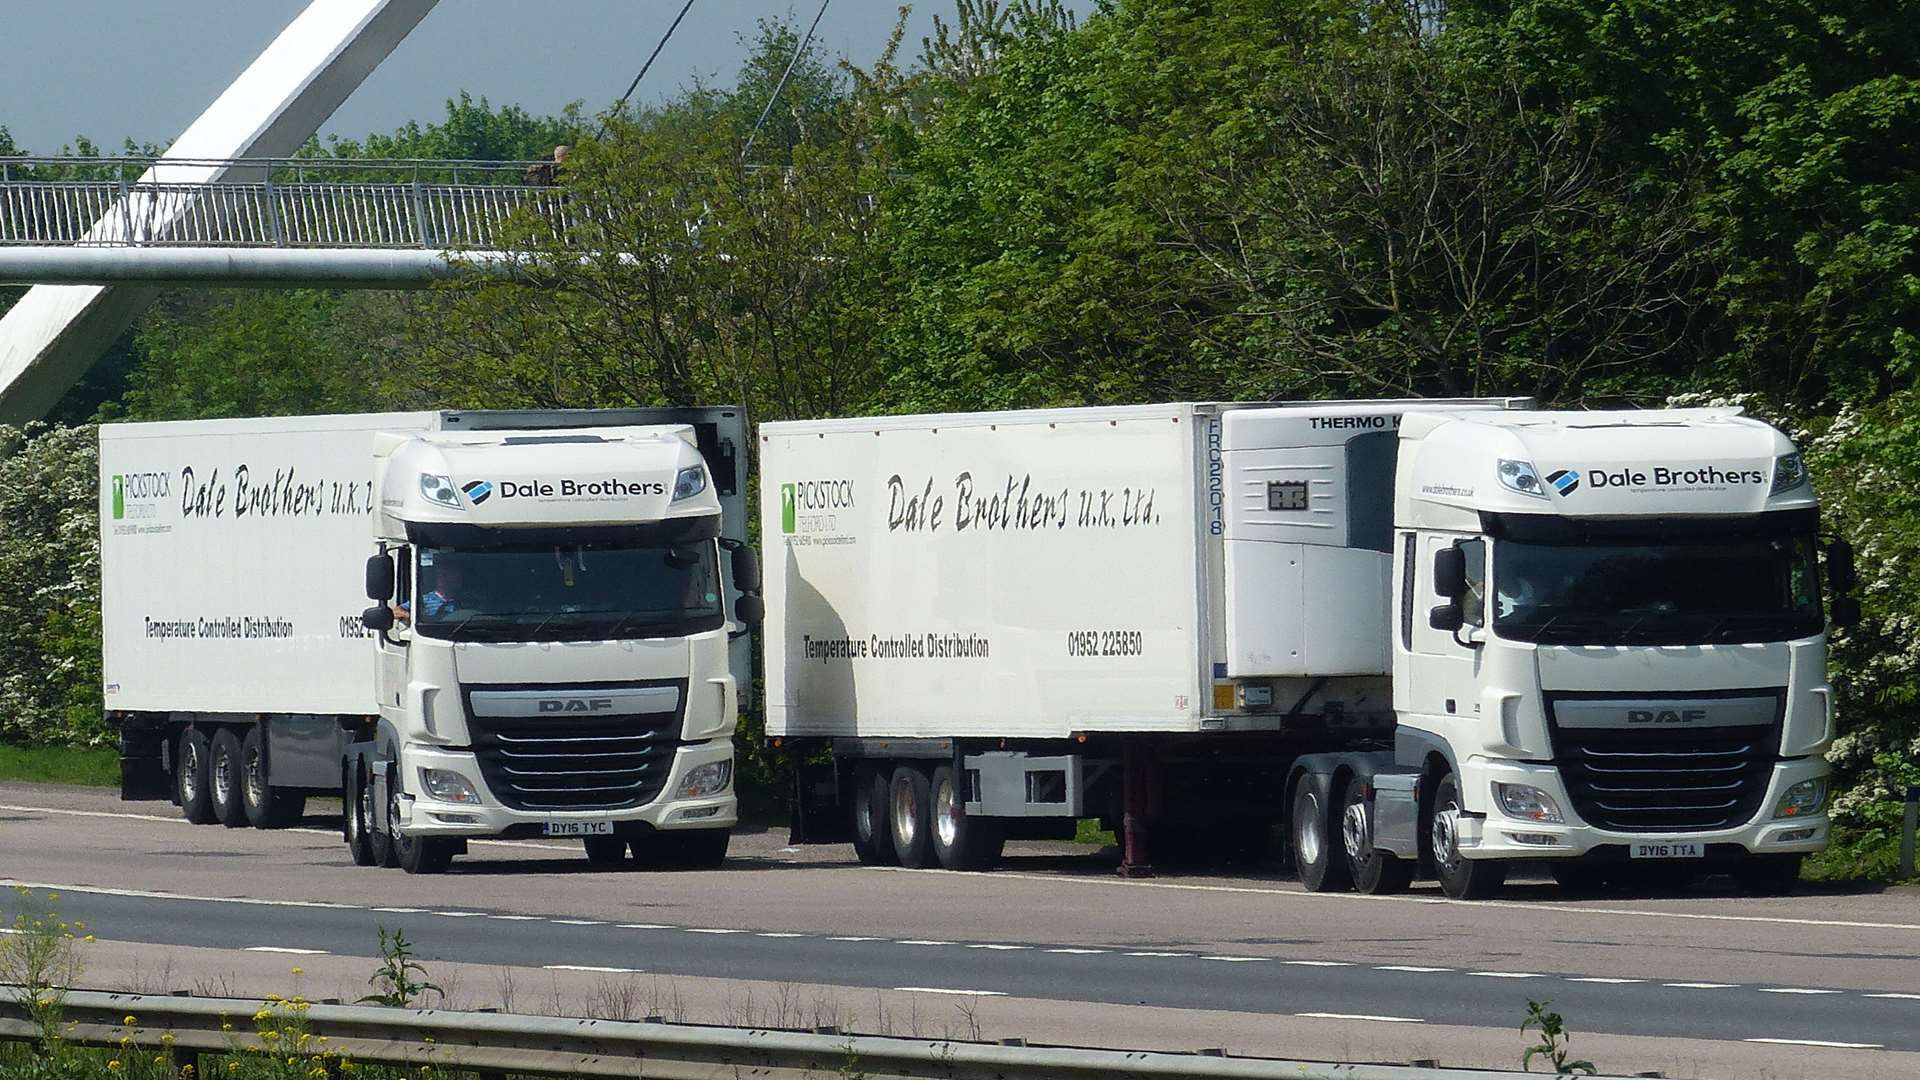 The lorry drivers swapped trailers on the motorway slip road